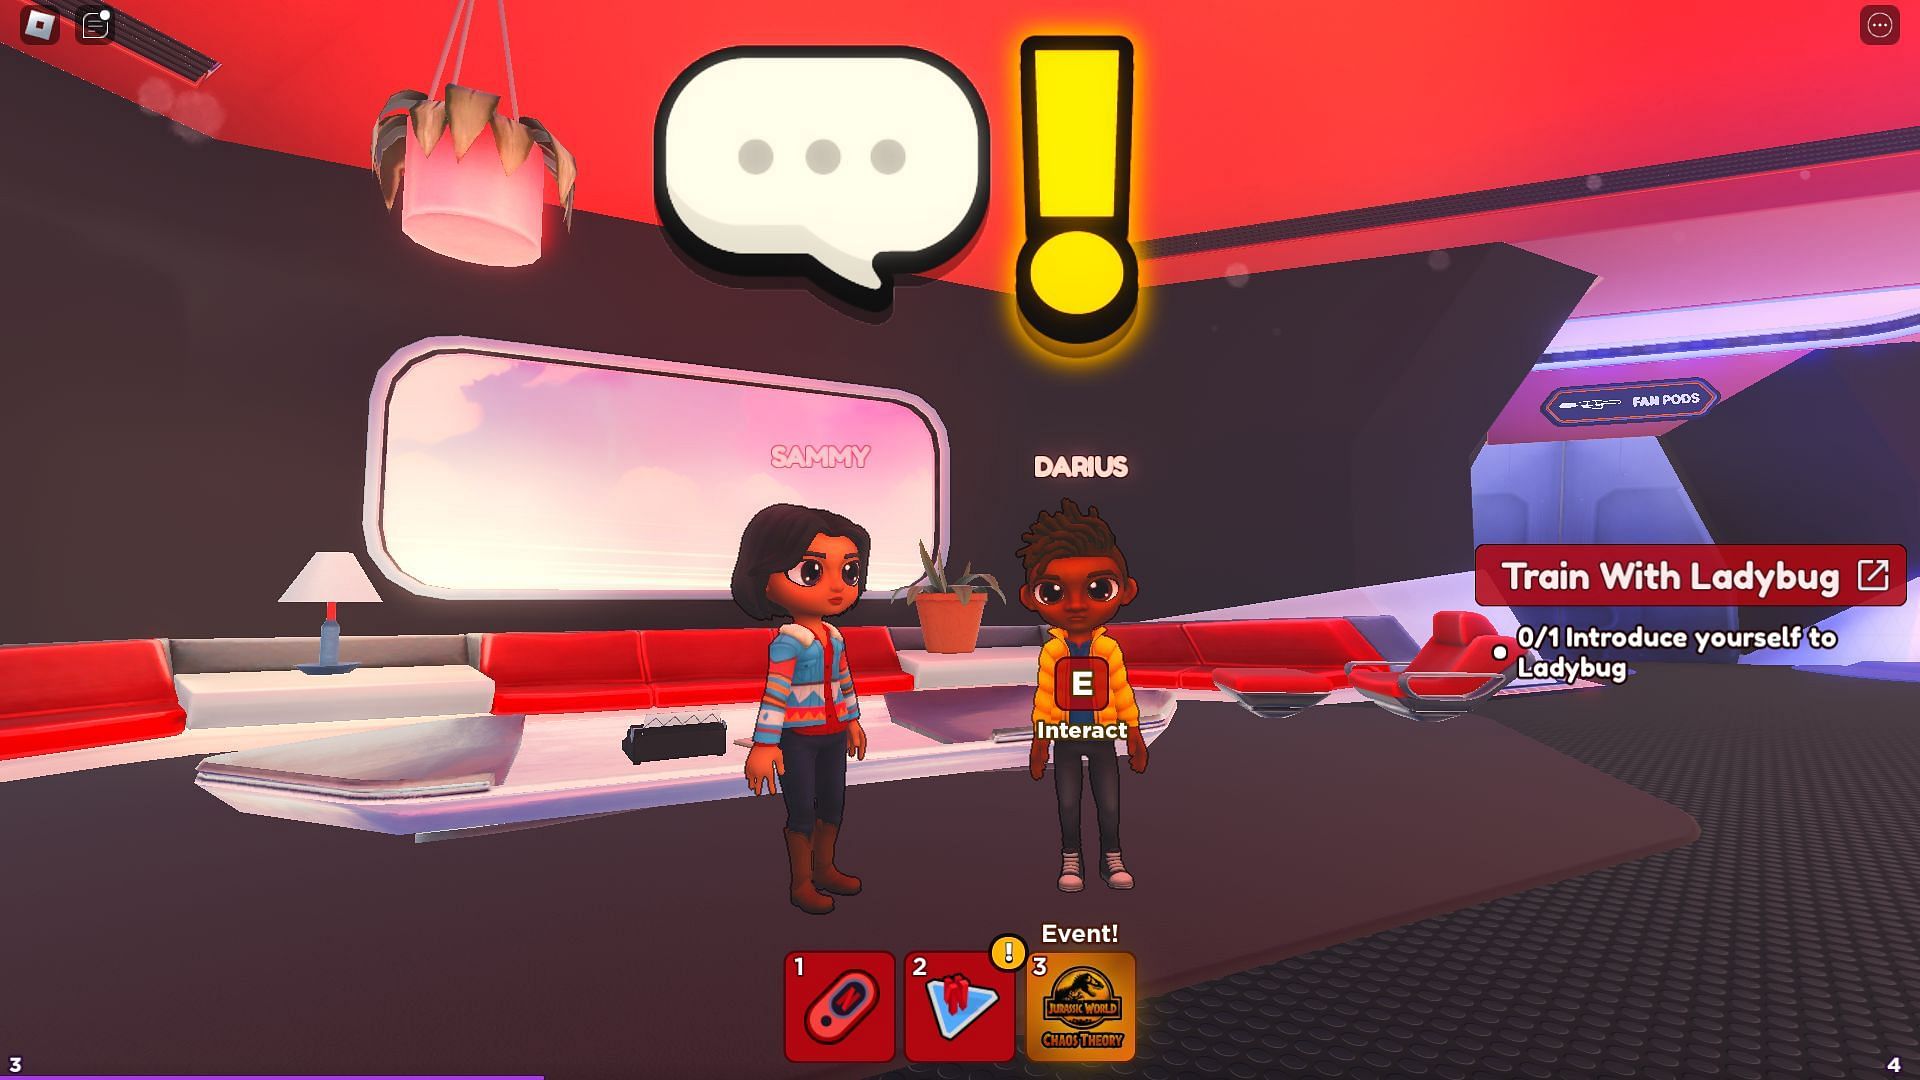 Talk to Darius or Sammy to begin the quest. (Image via Roblox)